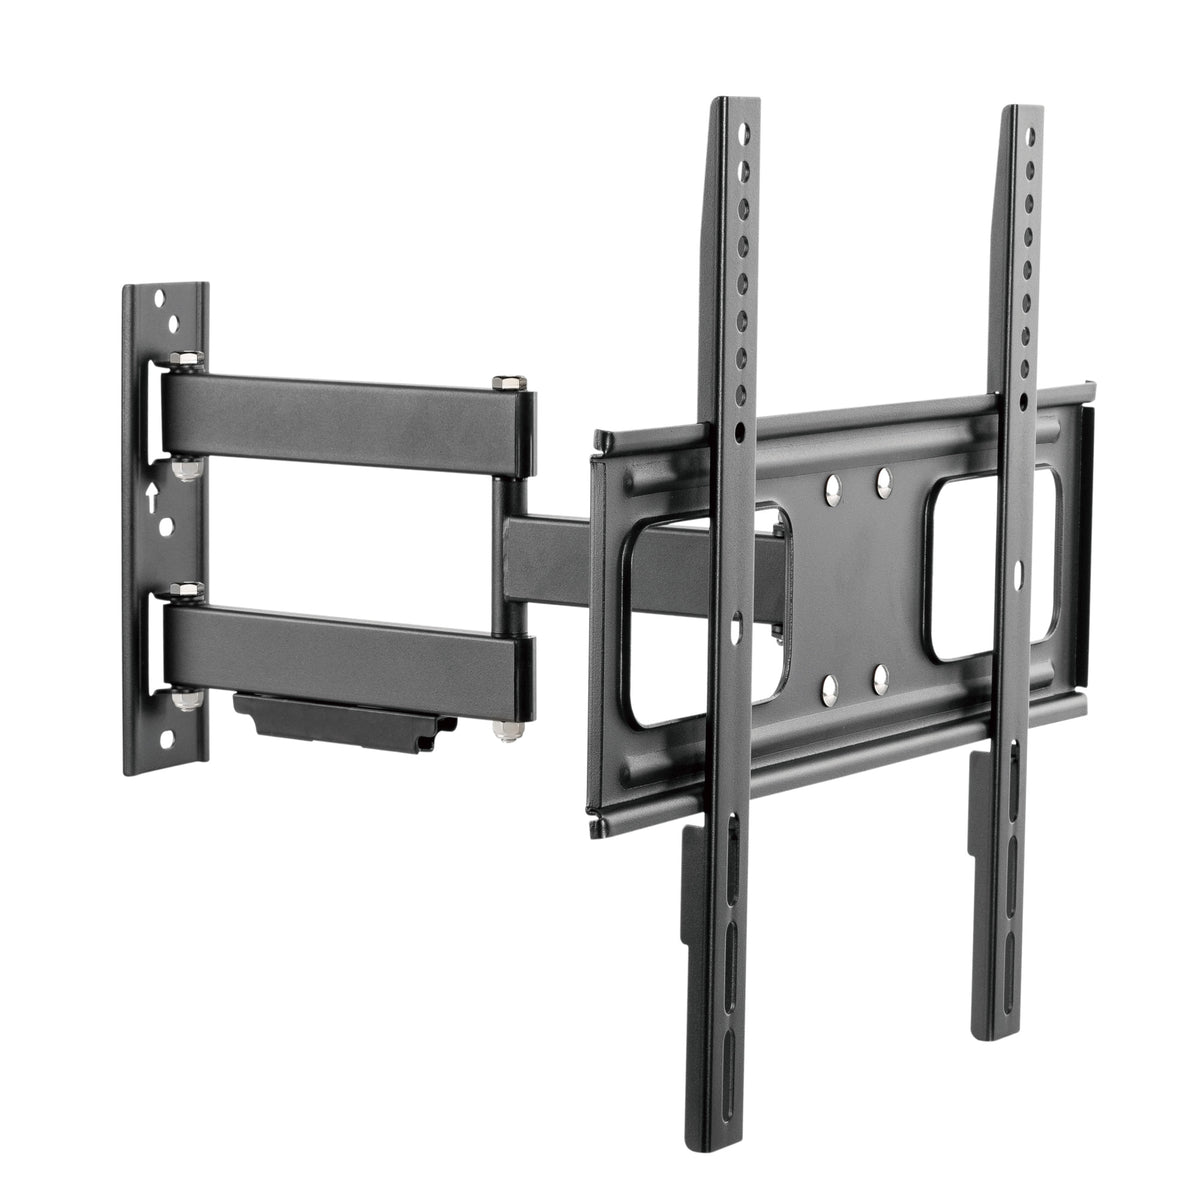 ZeboZap Outdoor Full Motion TV Mount, Swivel TV Wall Mount for Patio Gazebo, Weatherproof Tilt Low Profile TV Mount, Fits 32 to 70 Inch TVs, Supports Up To 110 lbs, Black